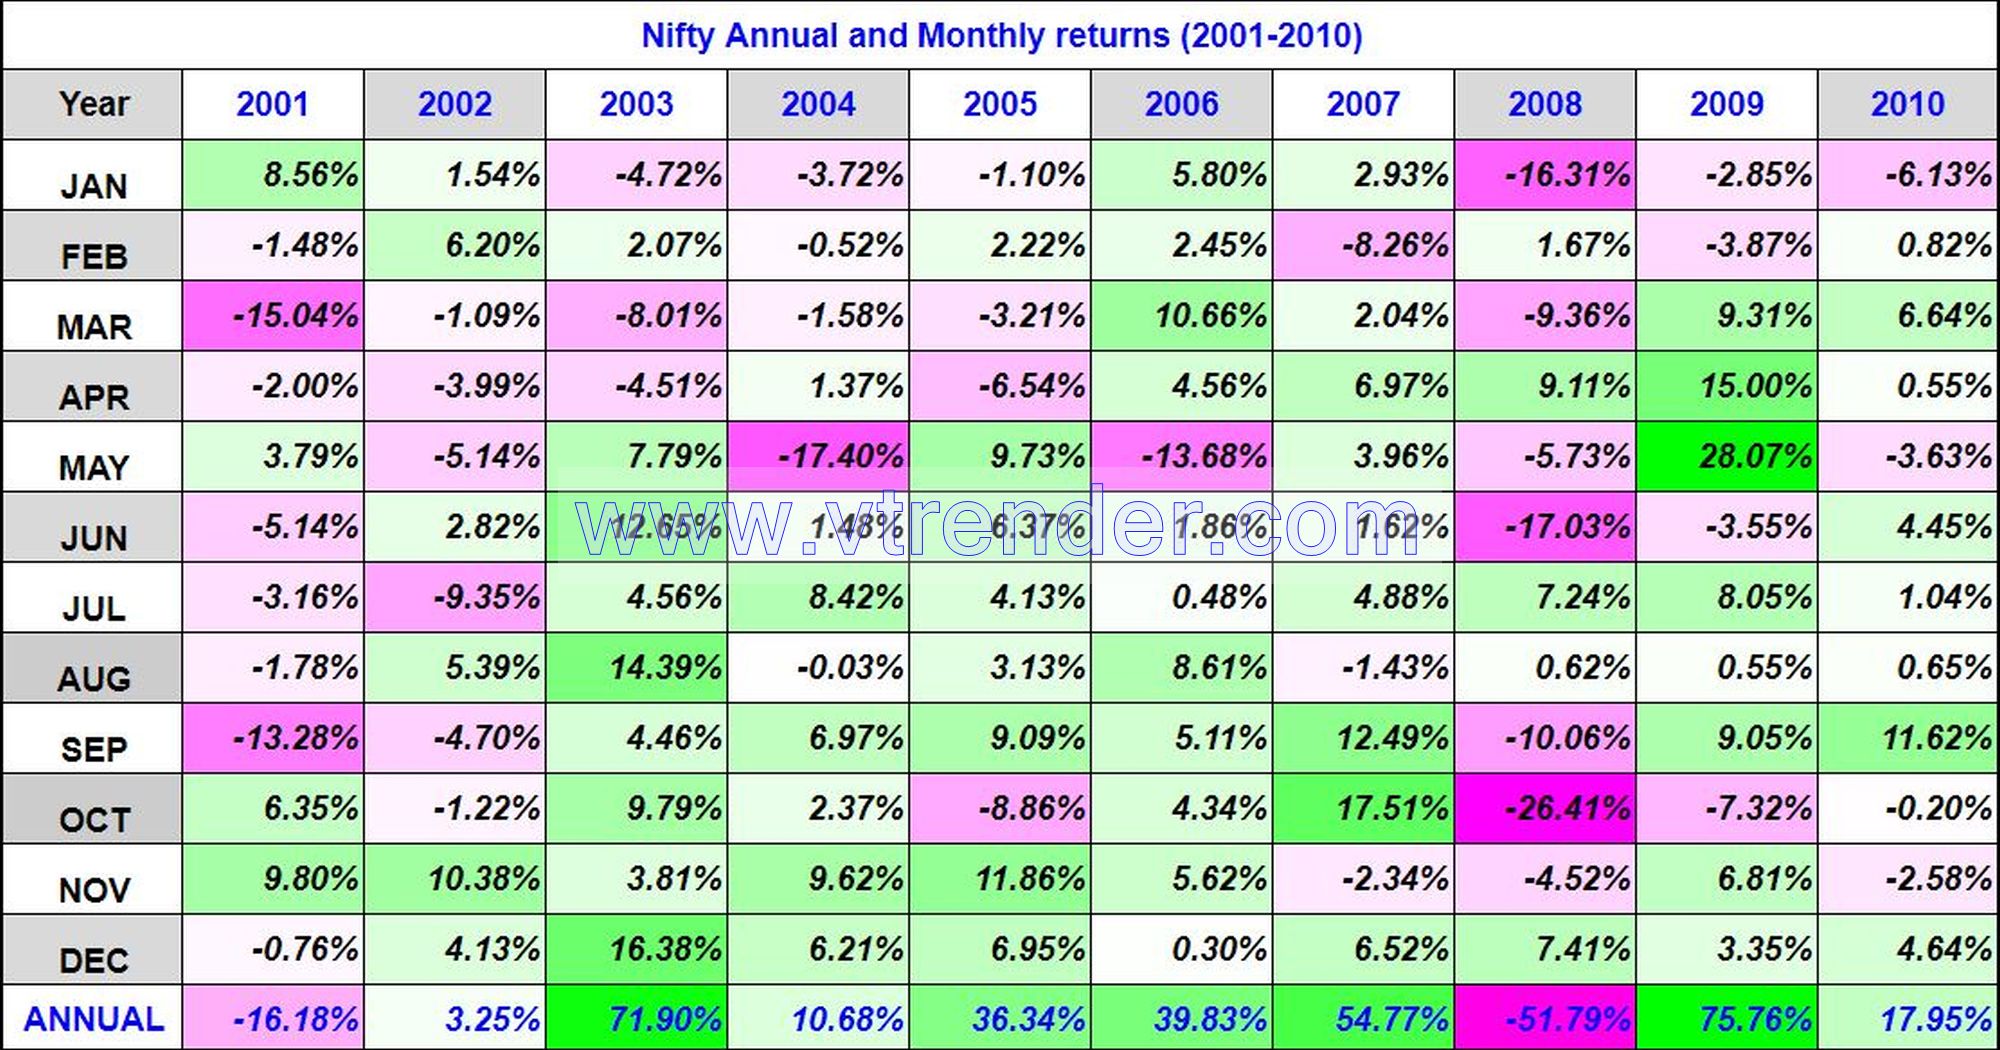 Niftyreturns2001 2010 Nifty 50 Monthly And Annual Returns (1991-2023) Updated 24Th Mar 2023 Annual, Monthly, Nifty Returns